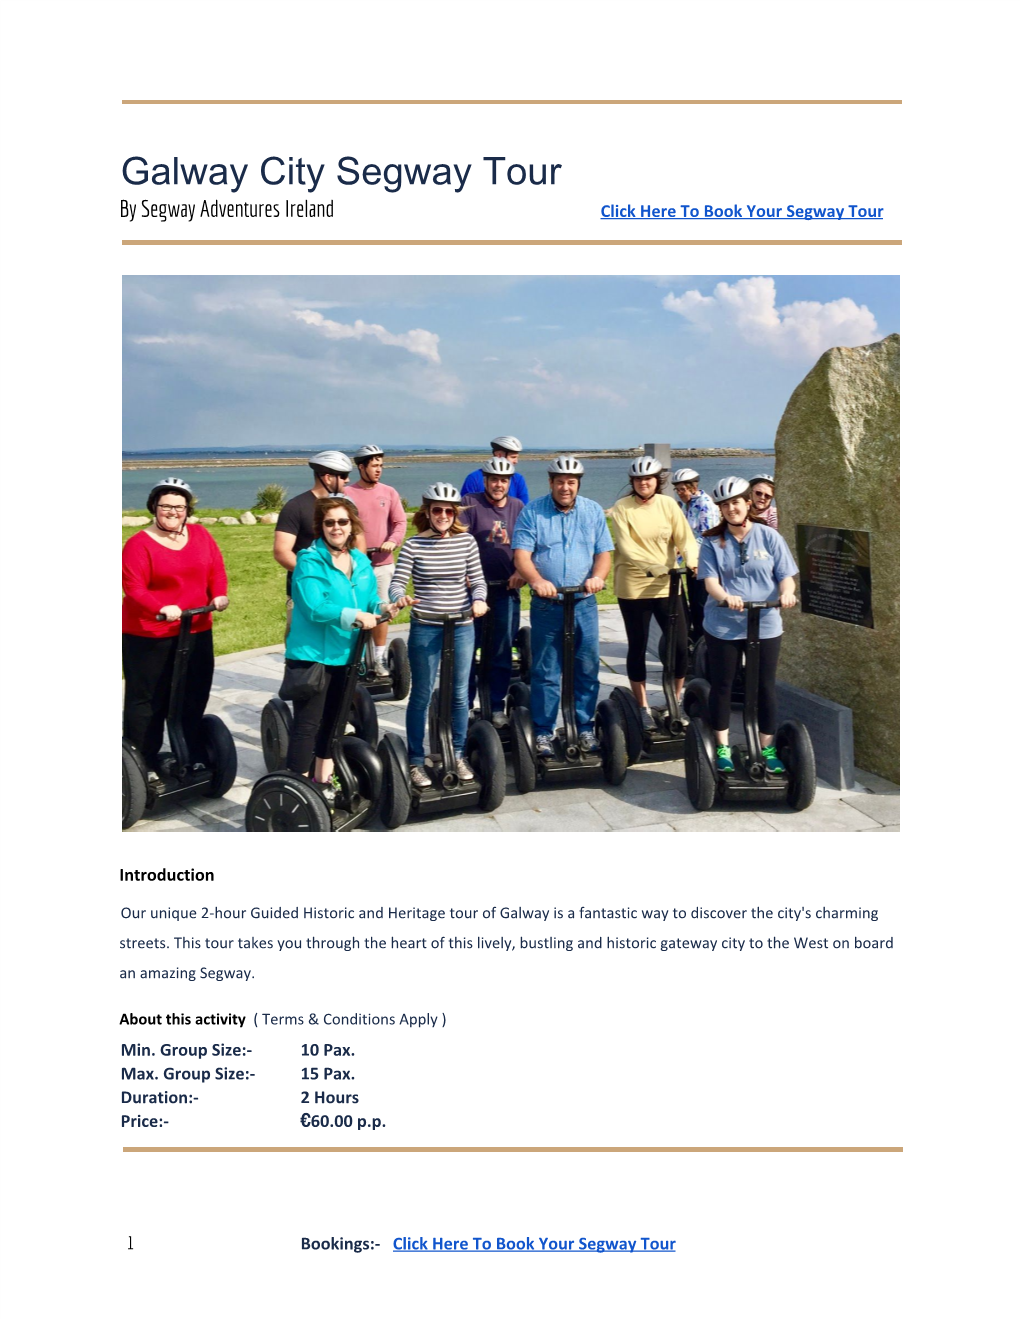 Galway City Segway Tour by Segway Adventures Ireland Click Here to Book Your Segway Tour